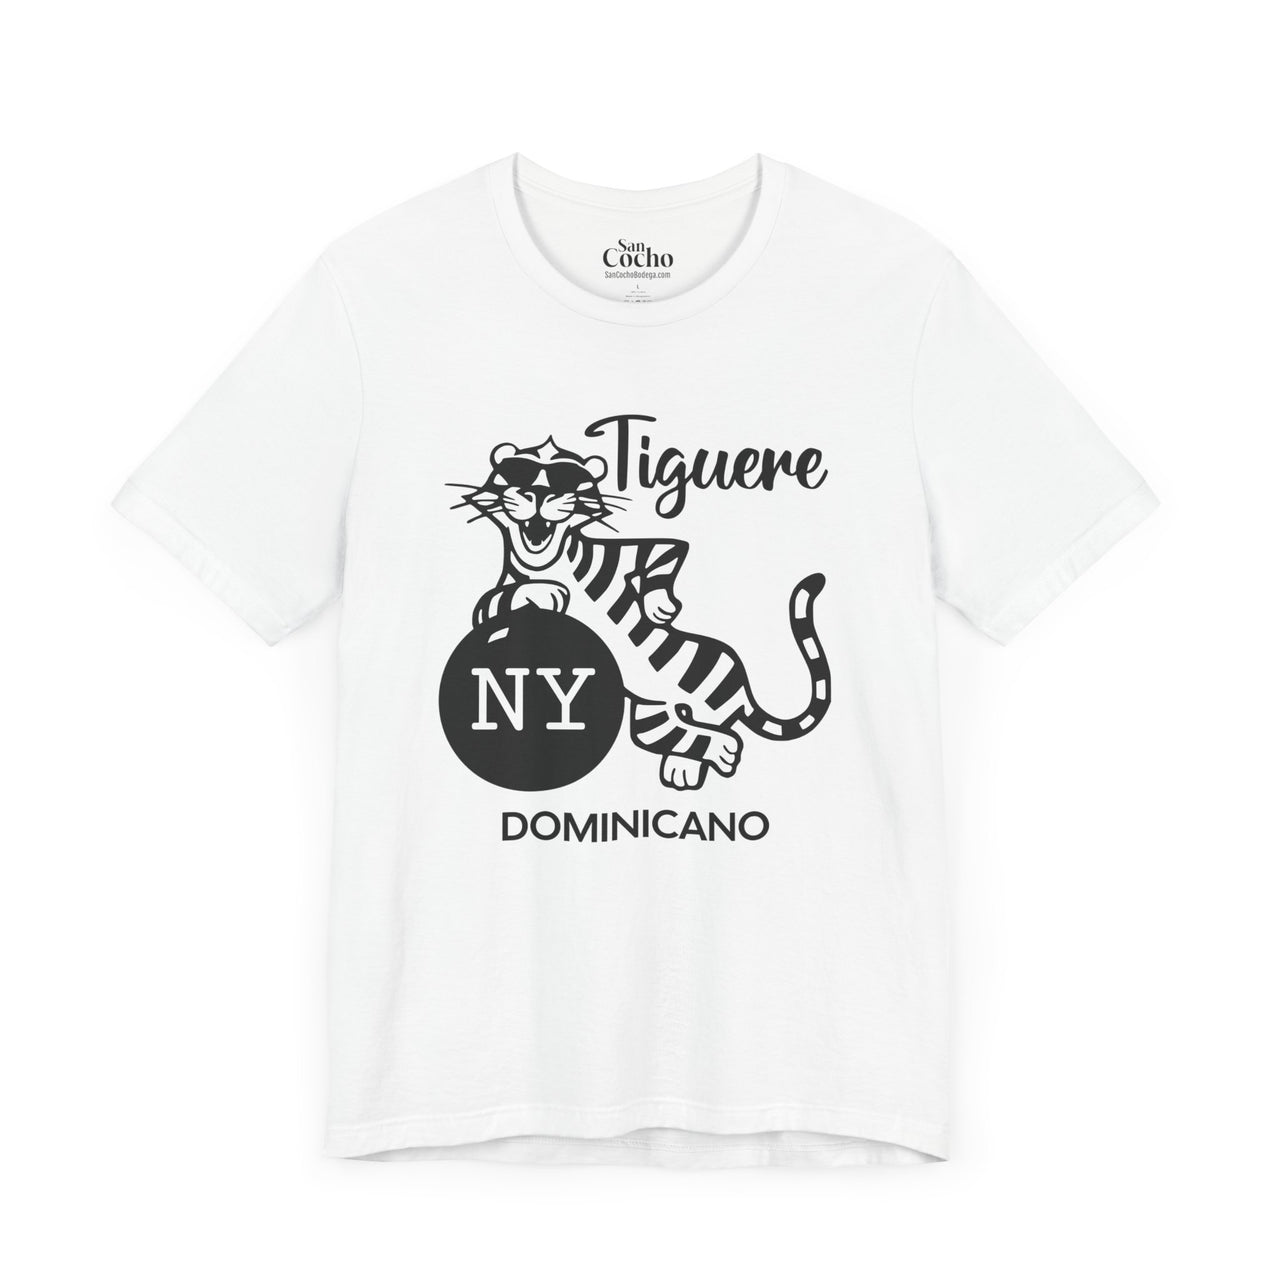 Tiguere NY Graphic T-Shirt | Unique Design for Proud Latinos